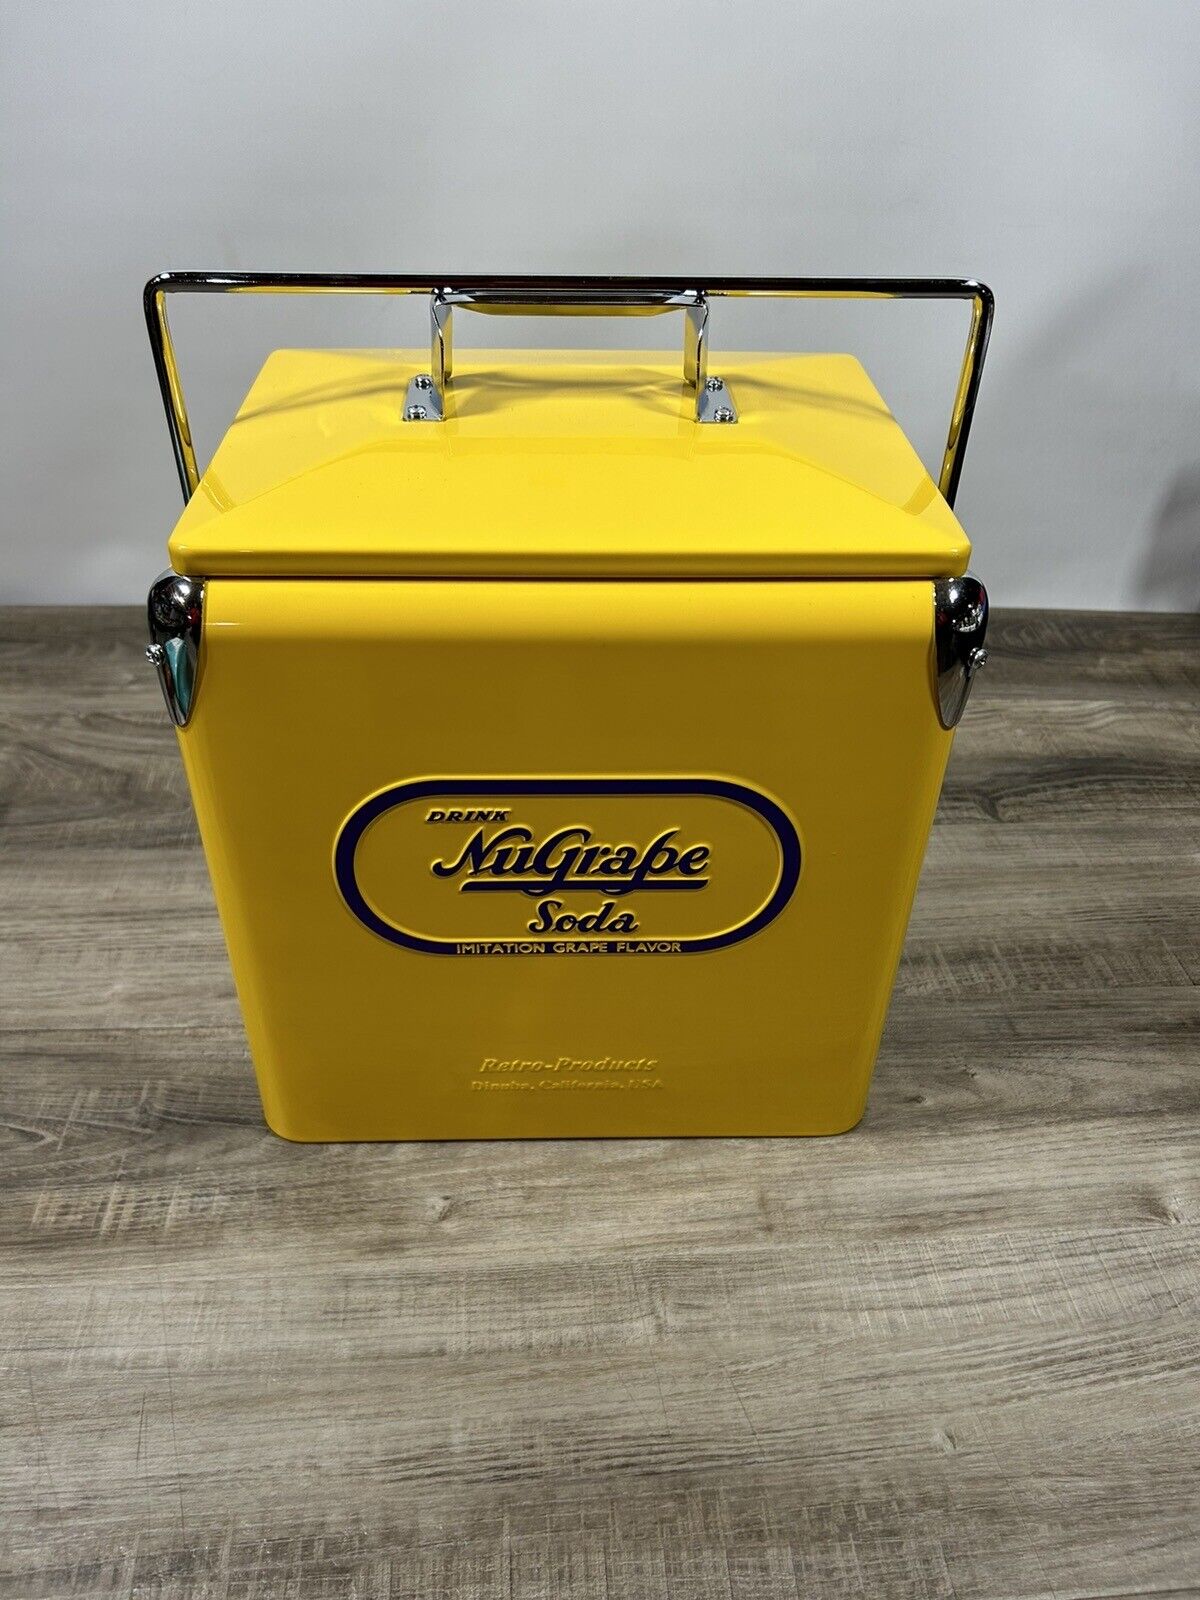 Vintage Metal NuGrape Soda Cooler by Retro-Products USA